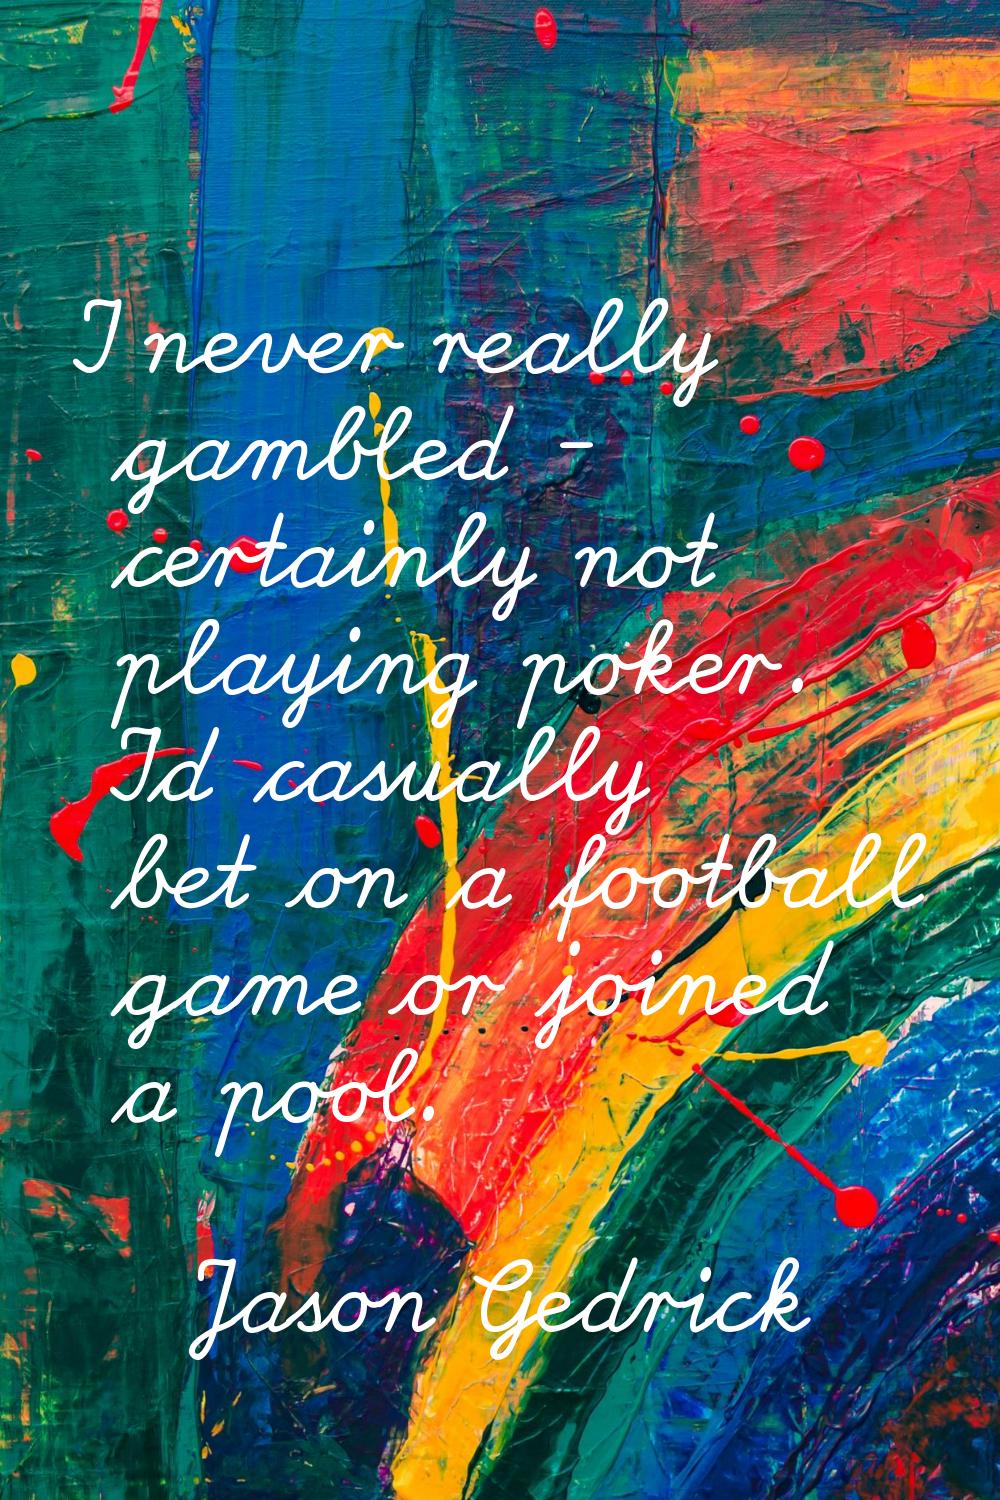 I never really gambled - certainly not playing poker. I'd casually bet on a football game or joined